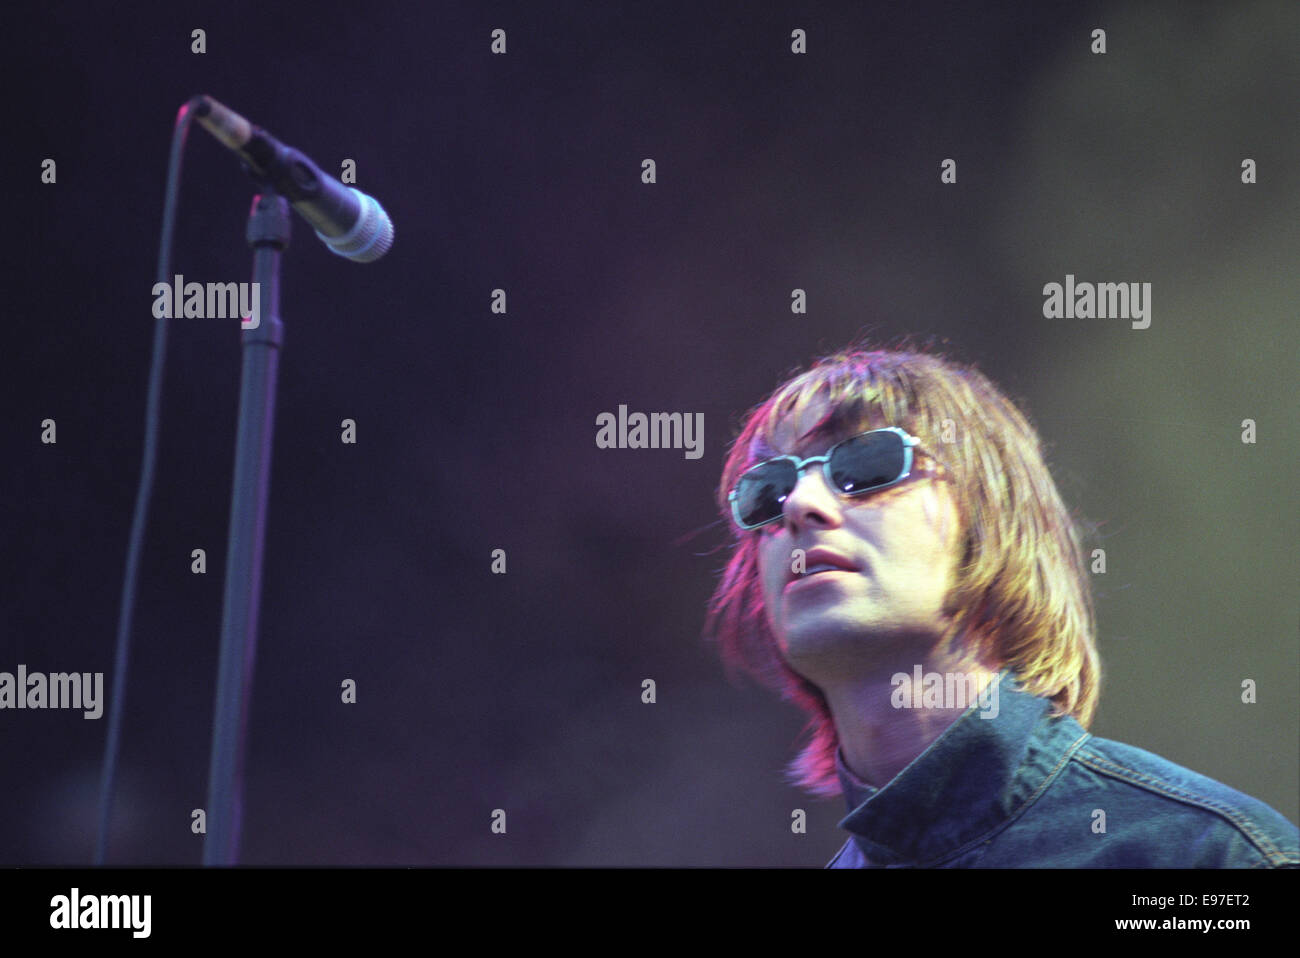 Liam Gallagher/ Oasis in concert at Loch Lomond, Scotland, in 1996. Stock Photo